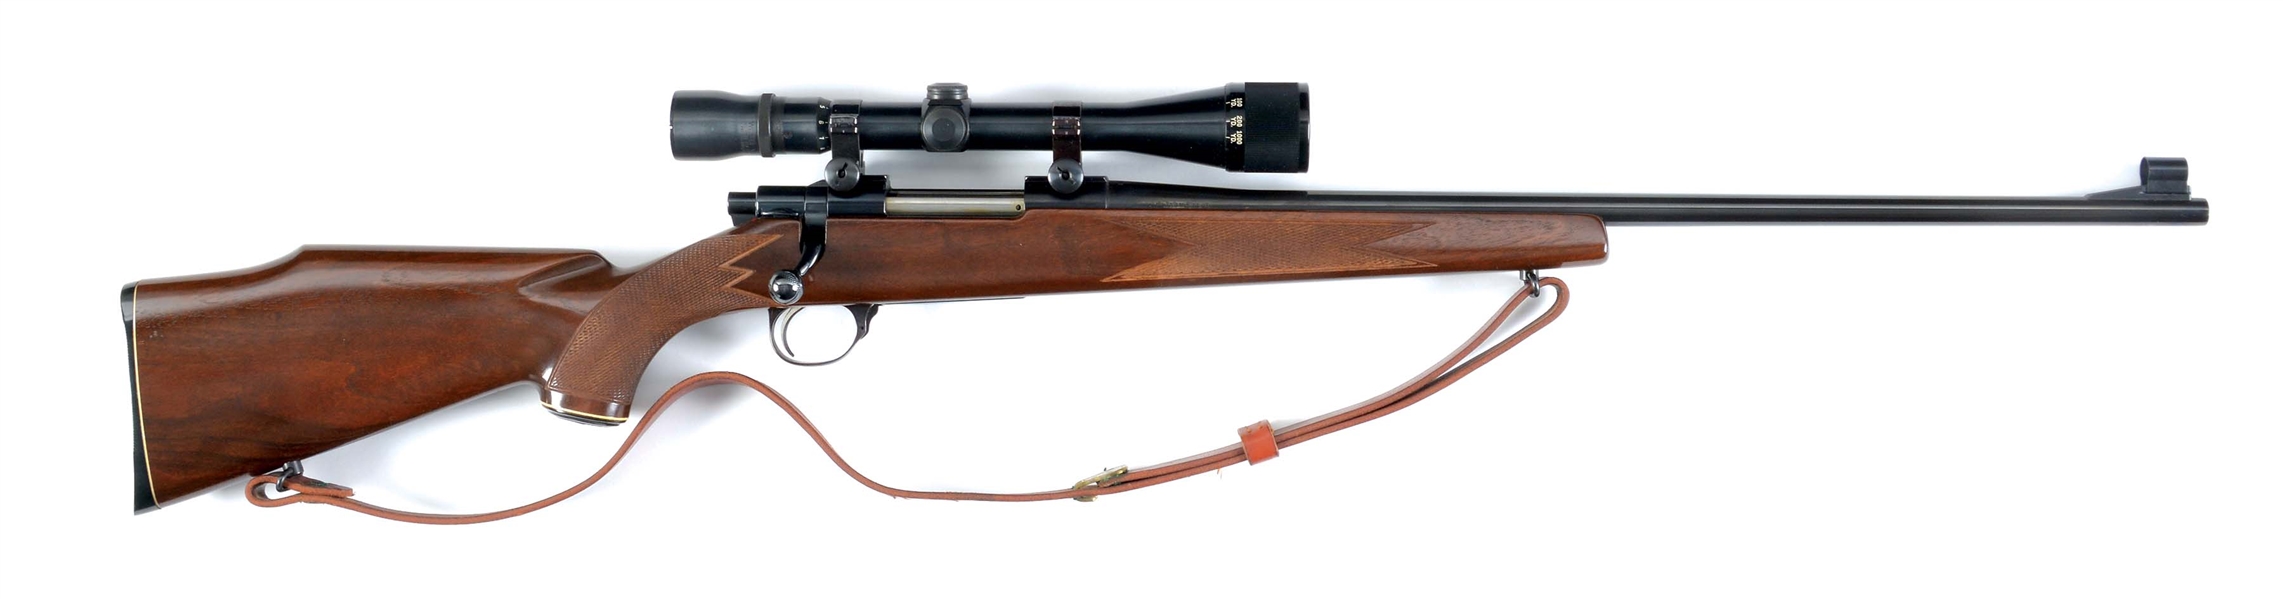 (M) SAKO FORESTER BOLT ACTION RIFLE WITH SCOPE.